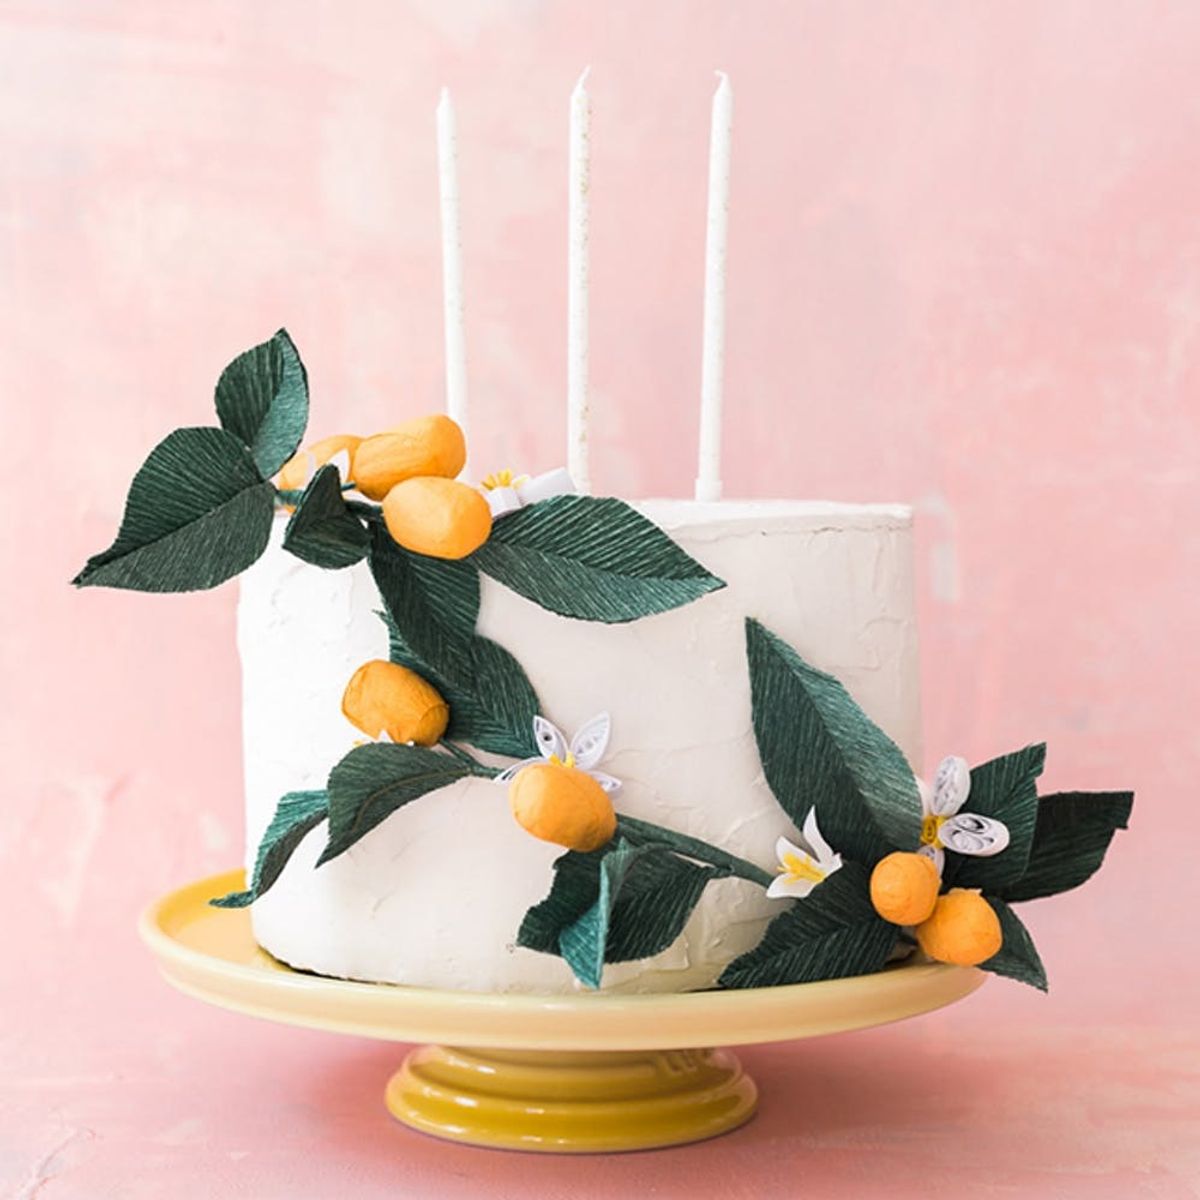 Custom Cake Toppers, Anthro Hacks, and More Weekend Craft Projects